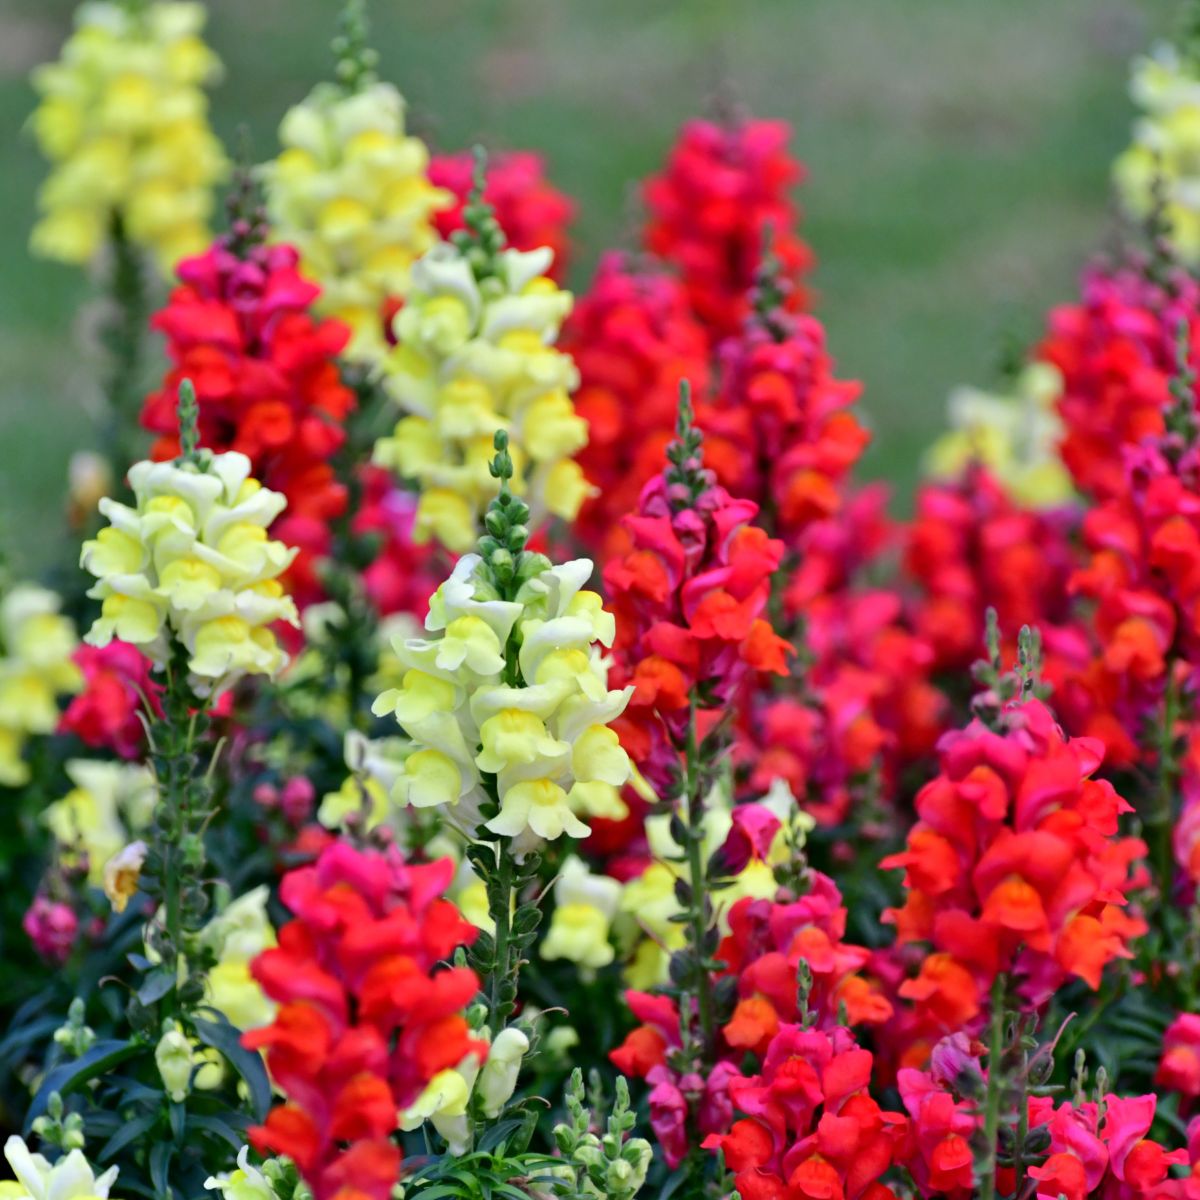 Red and yellow snapdragon flowers.